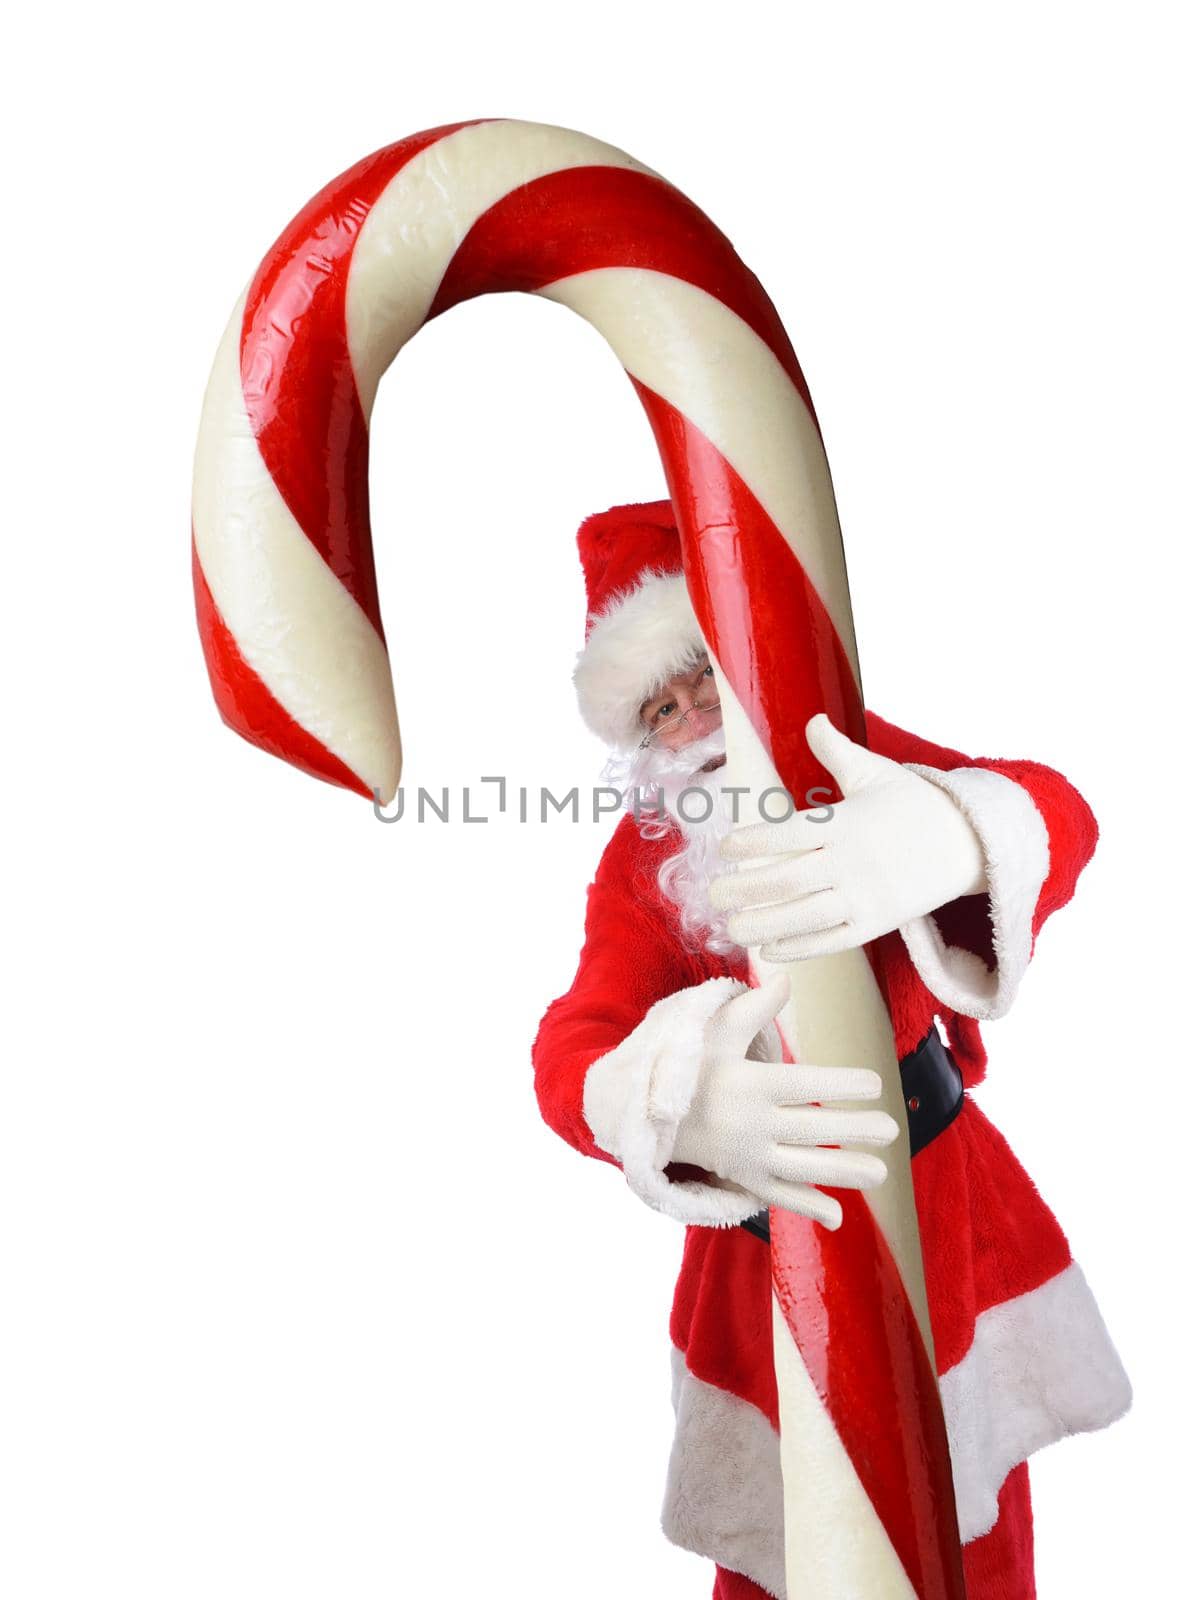 Man is traditional Santa Claus costume with his arms wrapped around a huge Candy Cane.